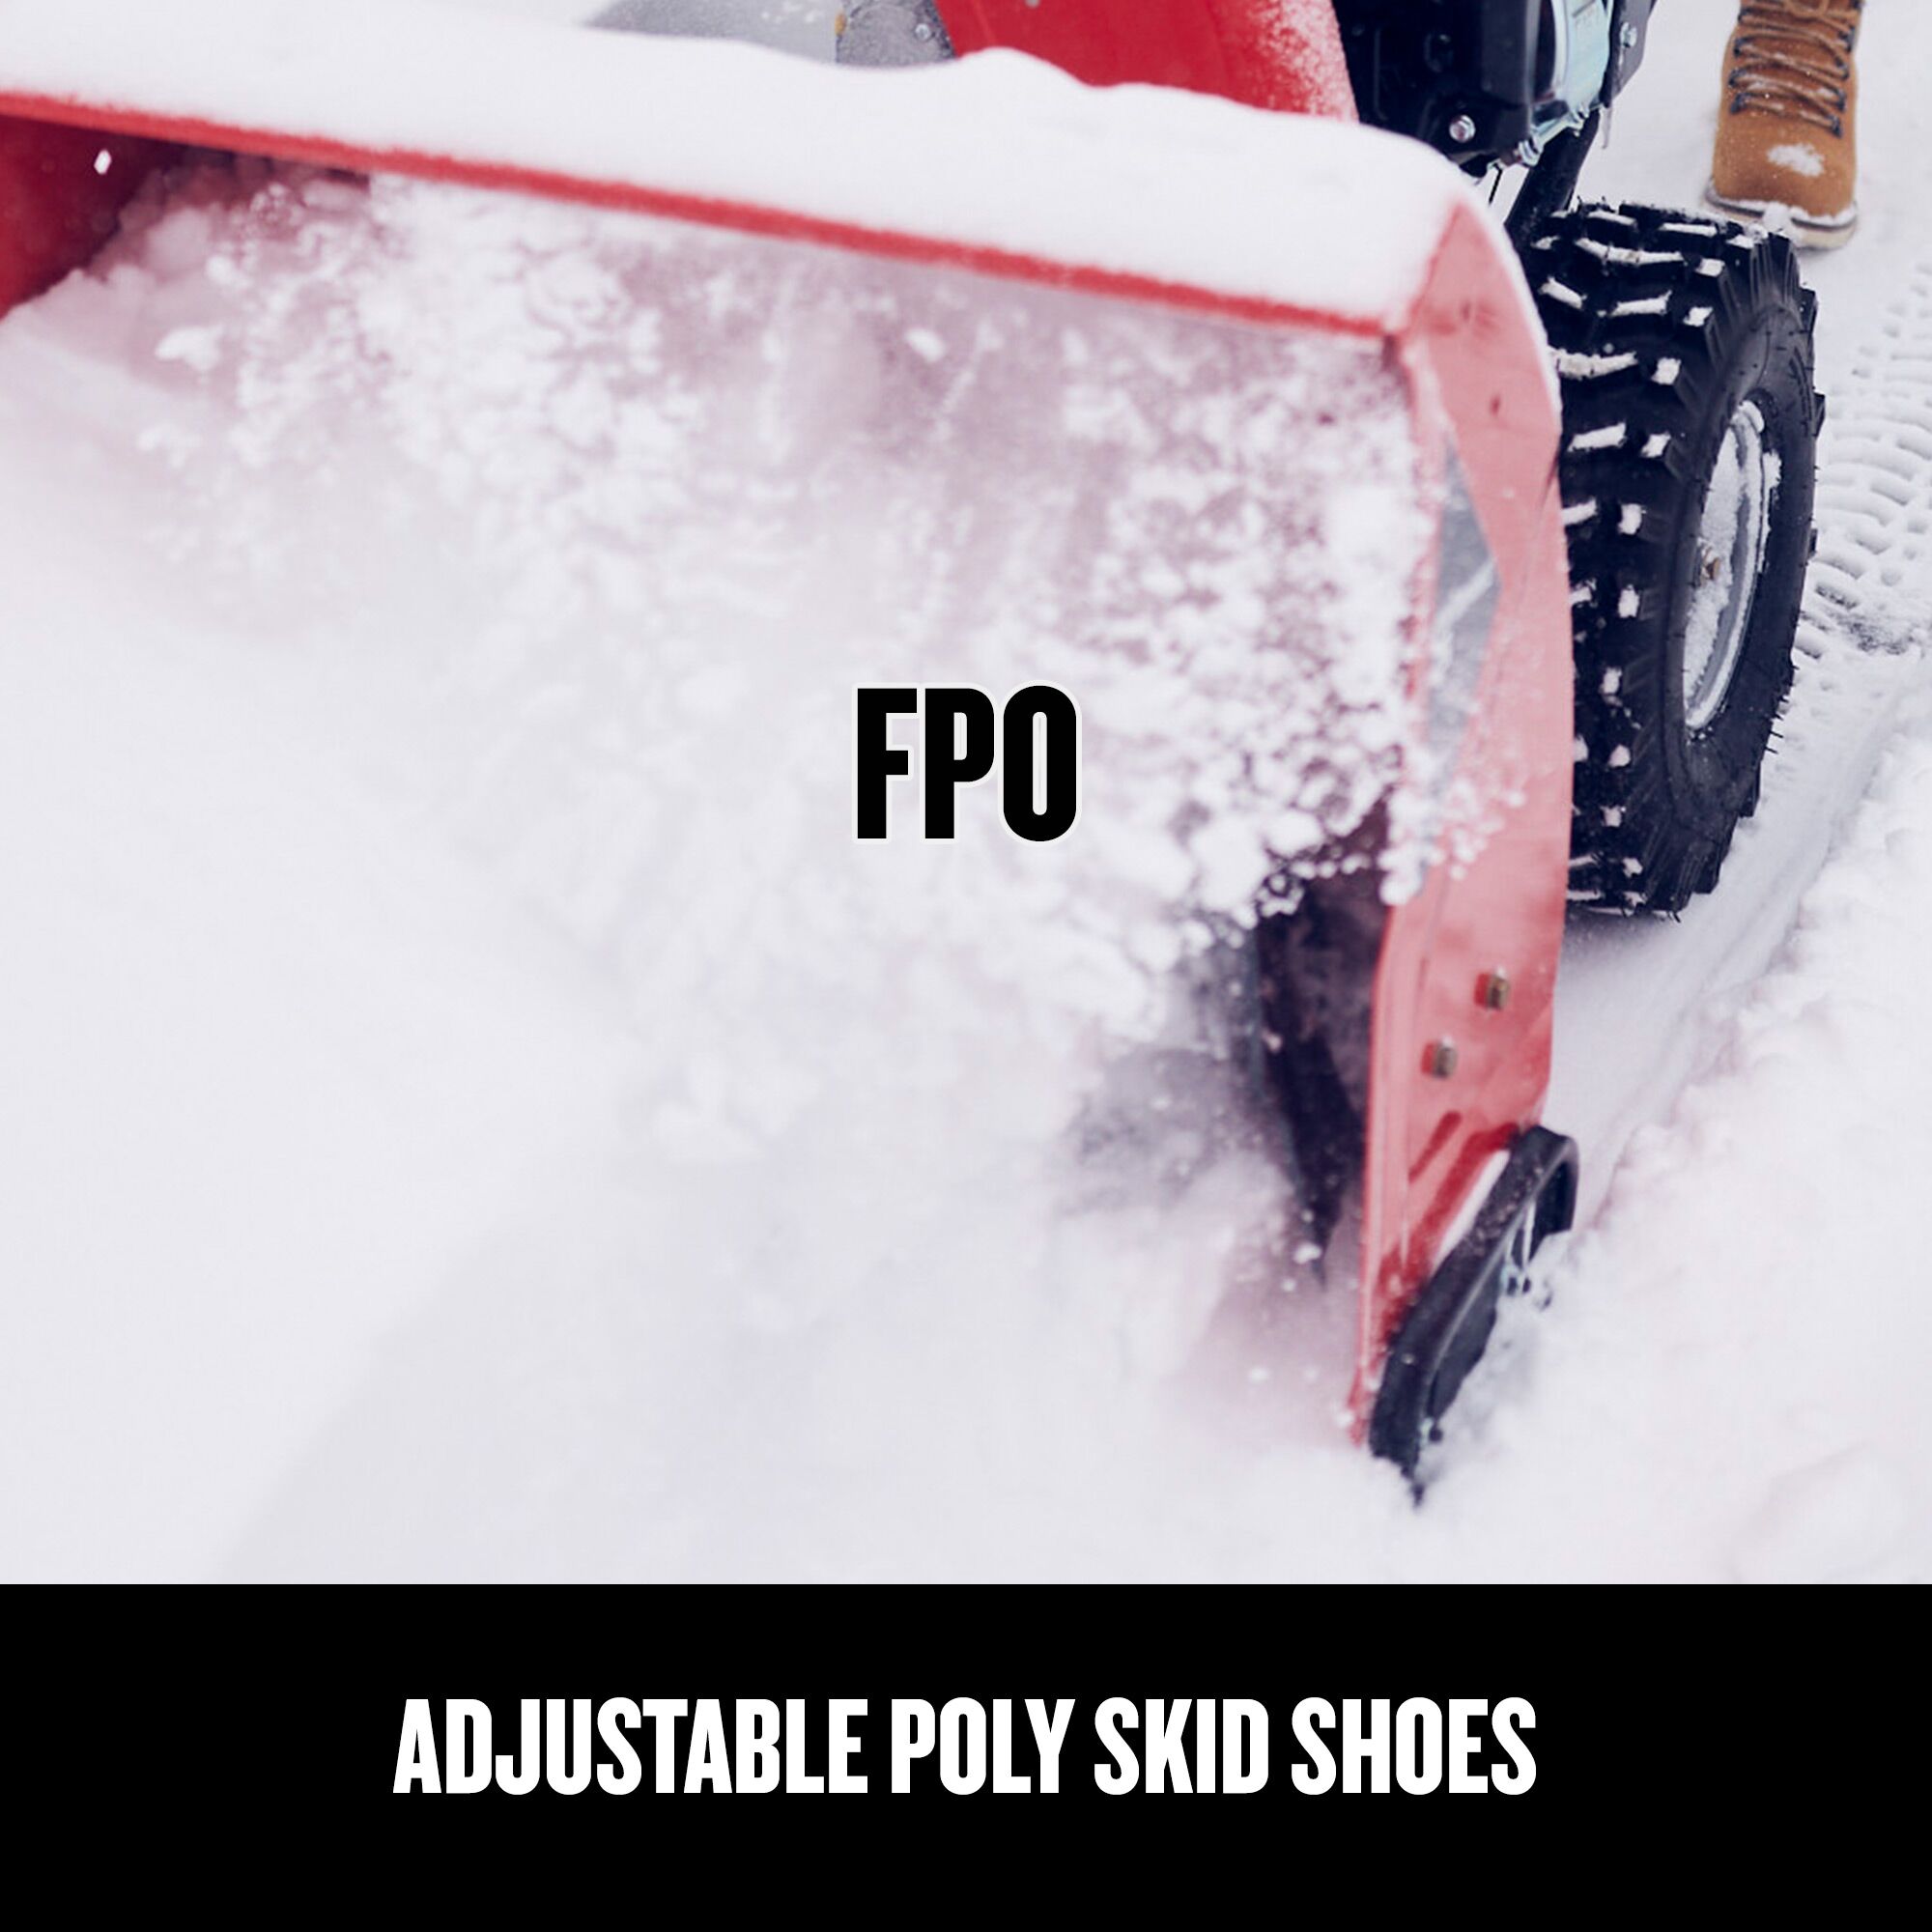 CRAFTSMAN 30-in. 357-cc Two-Stage Gas Snow Blower focused in on polyskid shoes